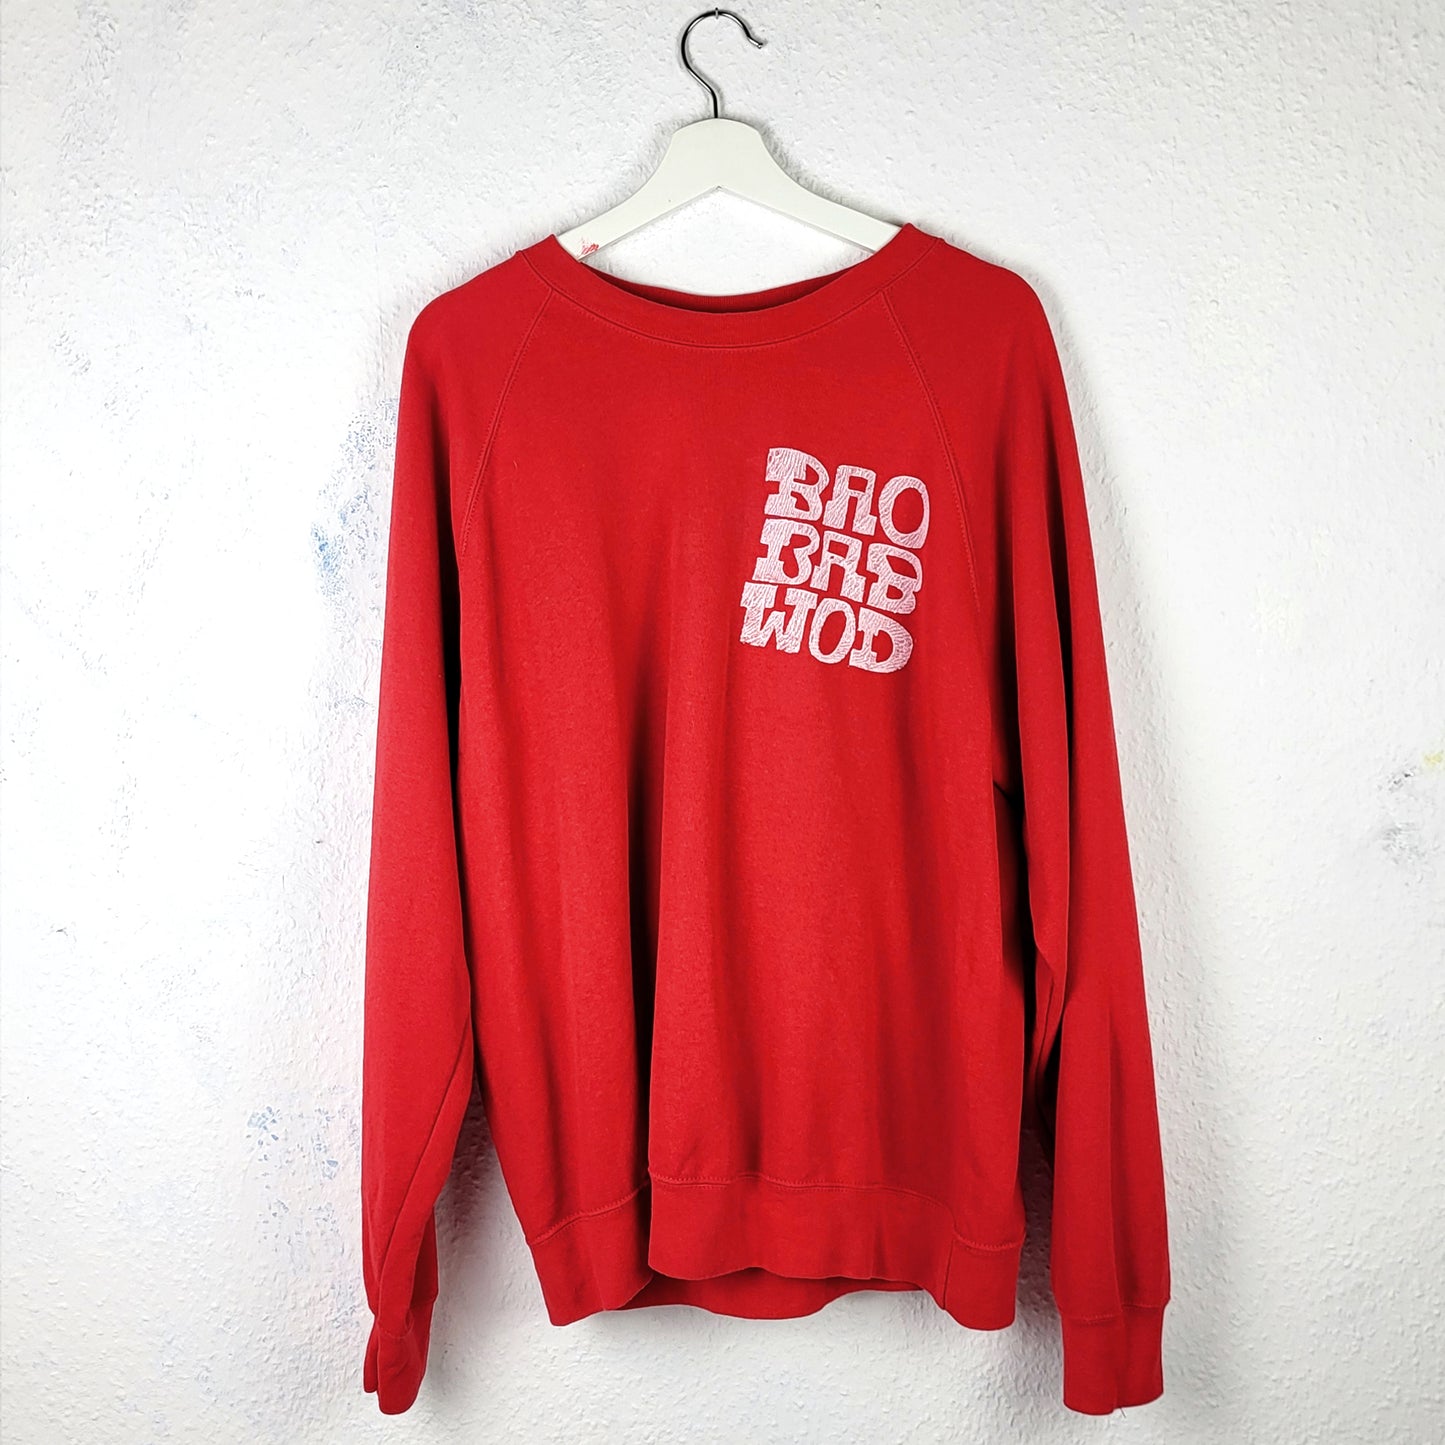 BATTERN – BAOBABWOD CLASSIC 2023, RED Pullover XL, Turkis Square, Unique Artwear